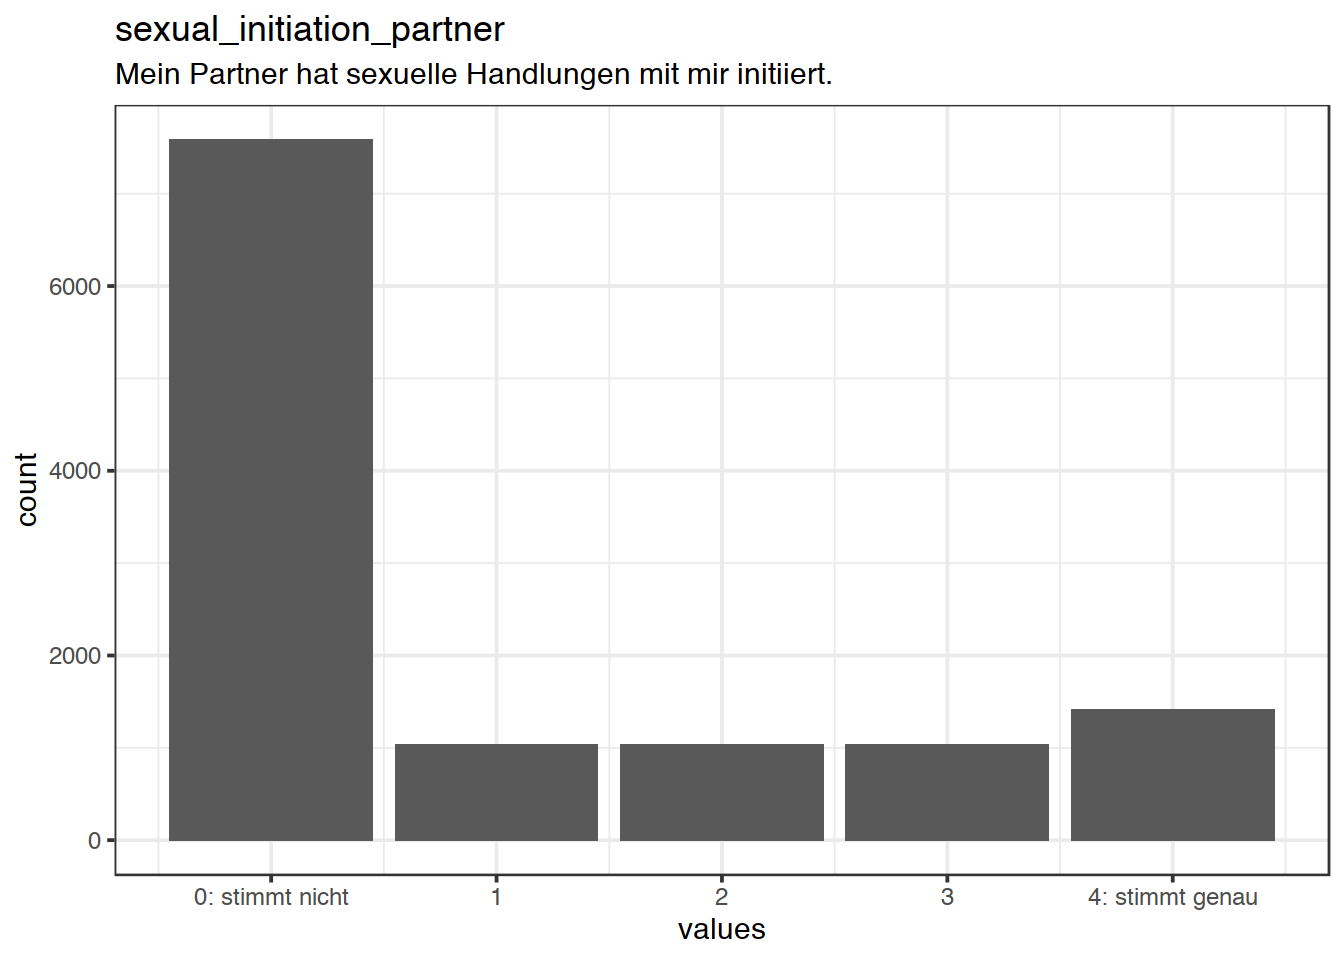 Distribution of values for sexual_initiation_partner